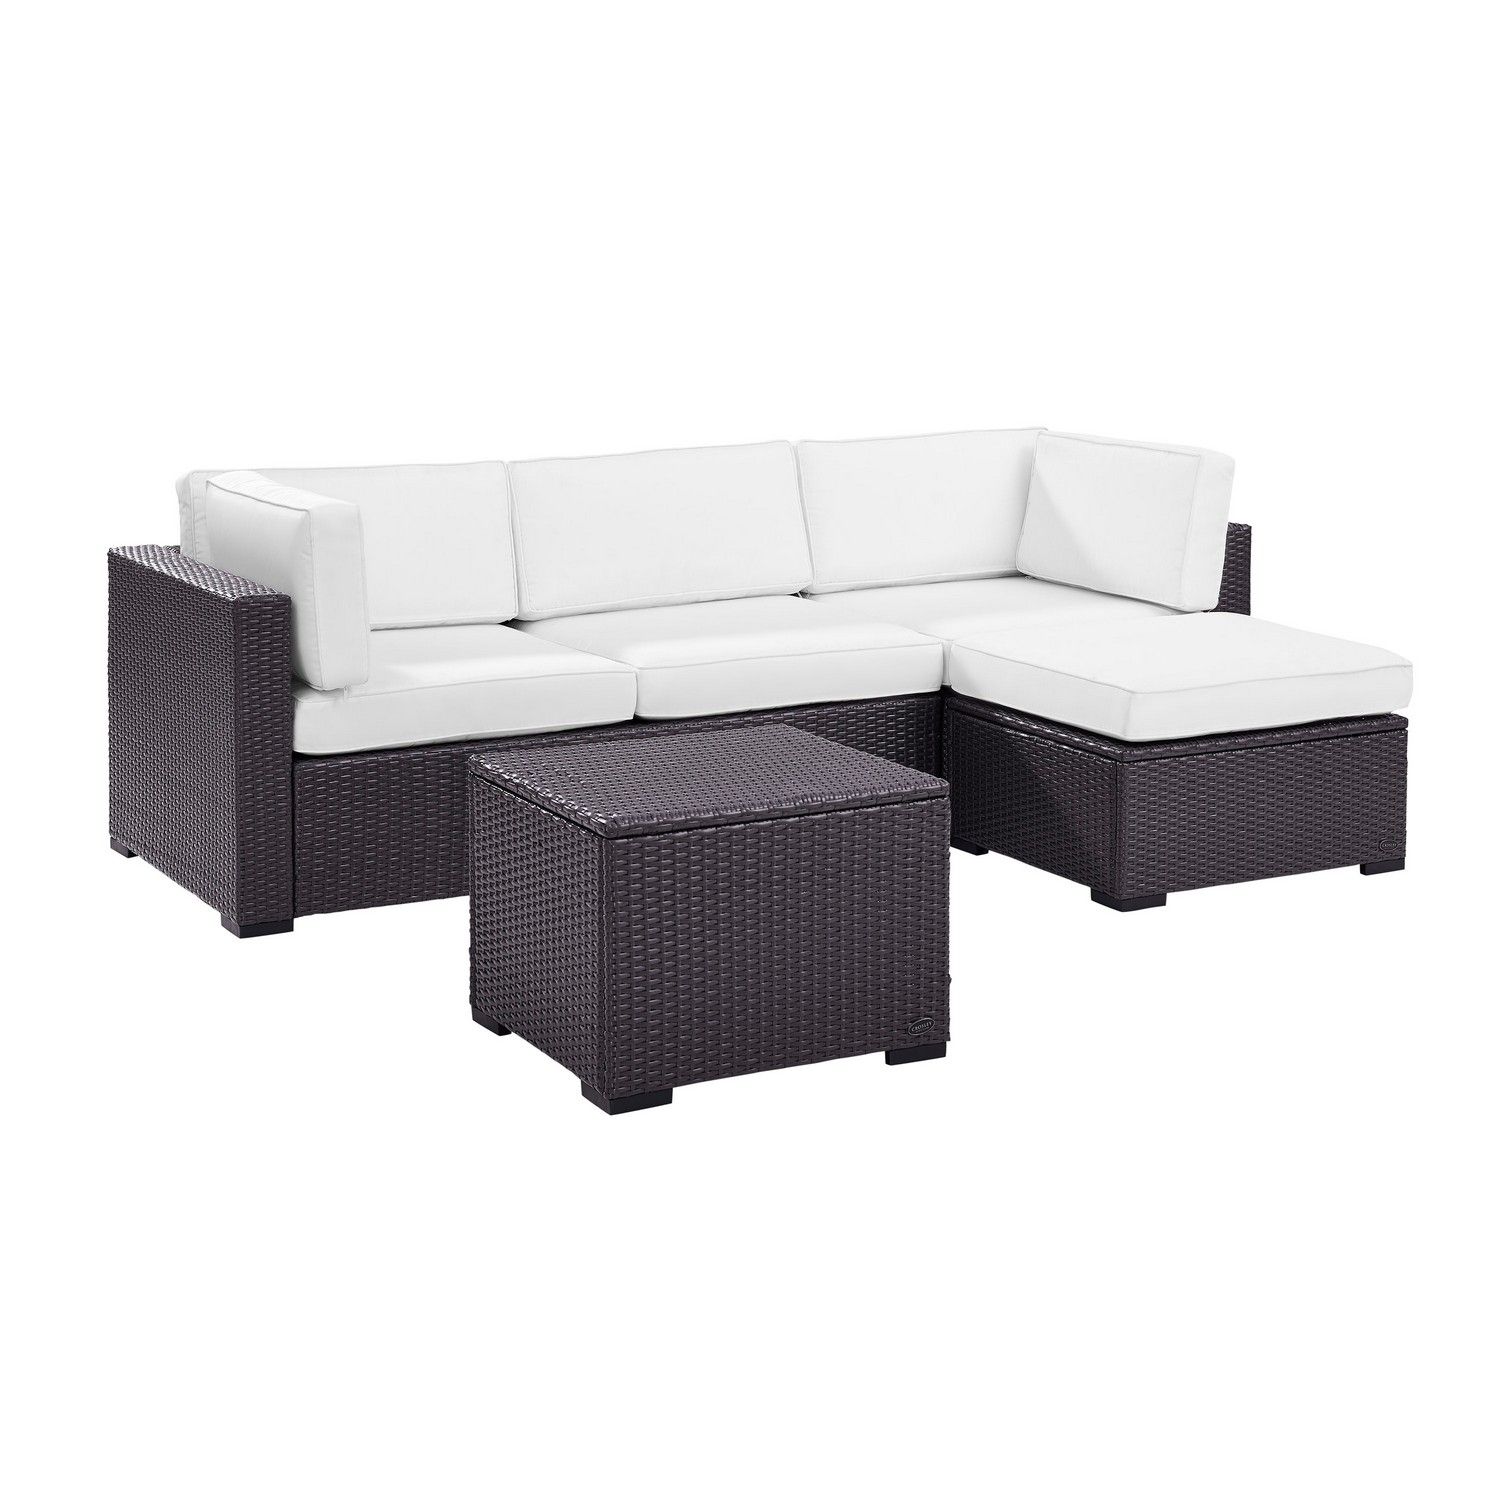 Crosley Biscayne 4-PC Outdoor Wicker Sectional Set - Loveseat, Corner Chair, Ottoman, Coffee Table - White/Brown